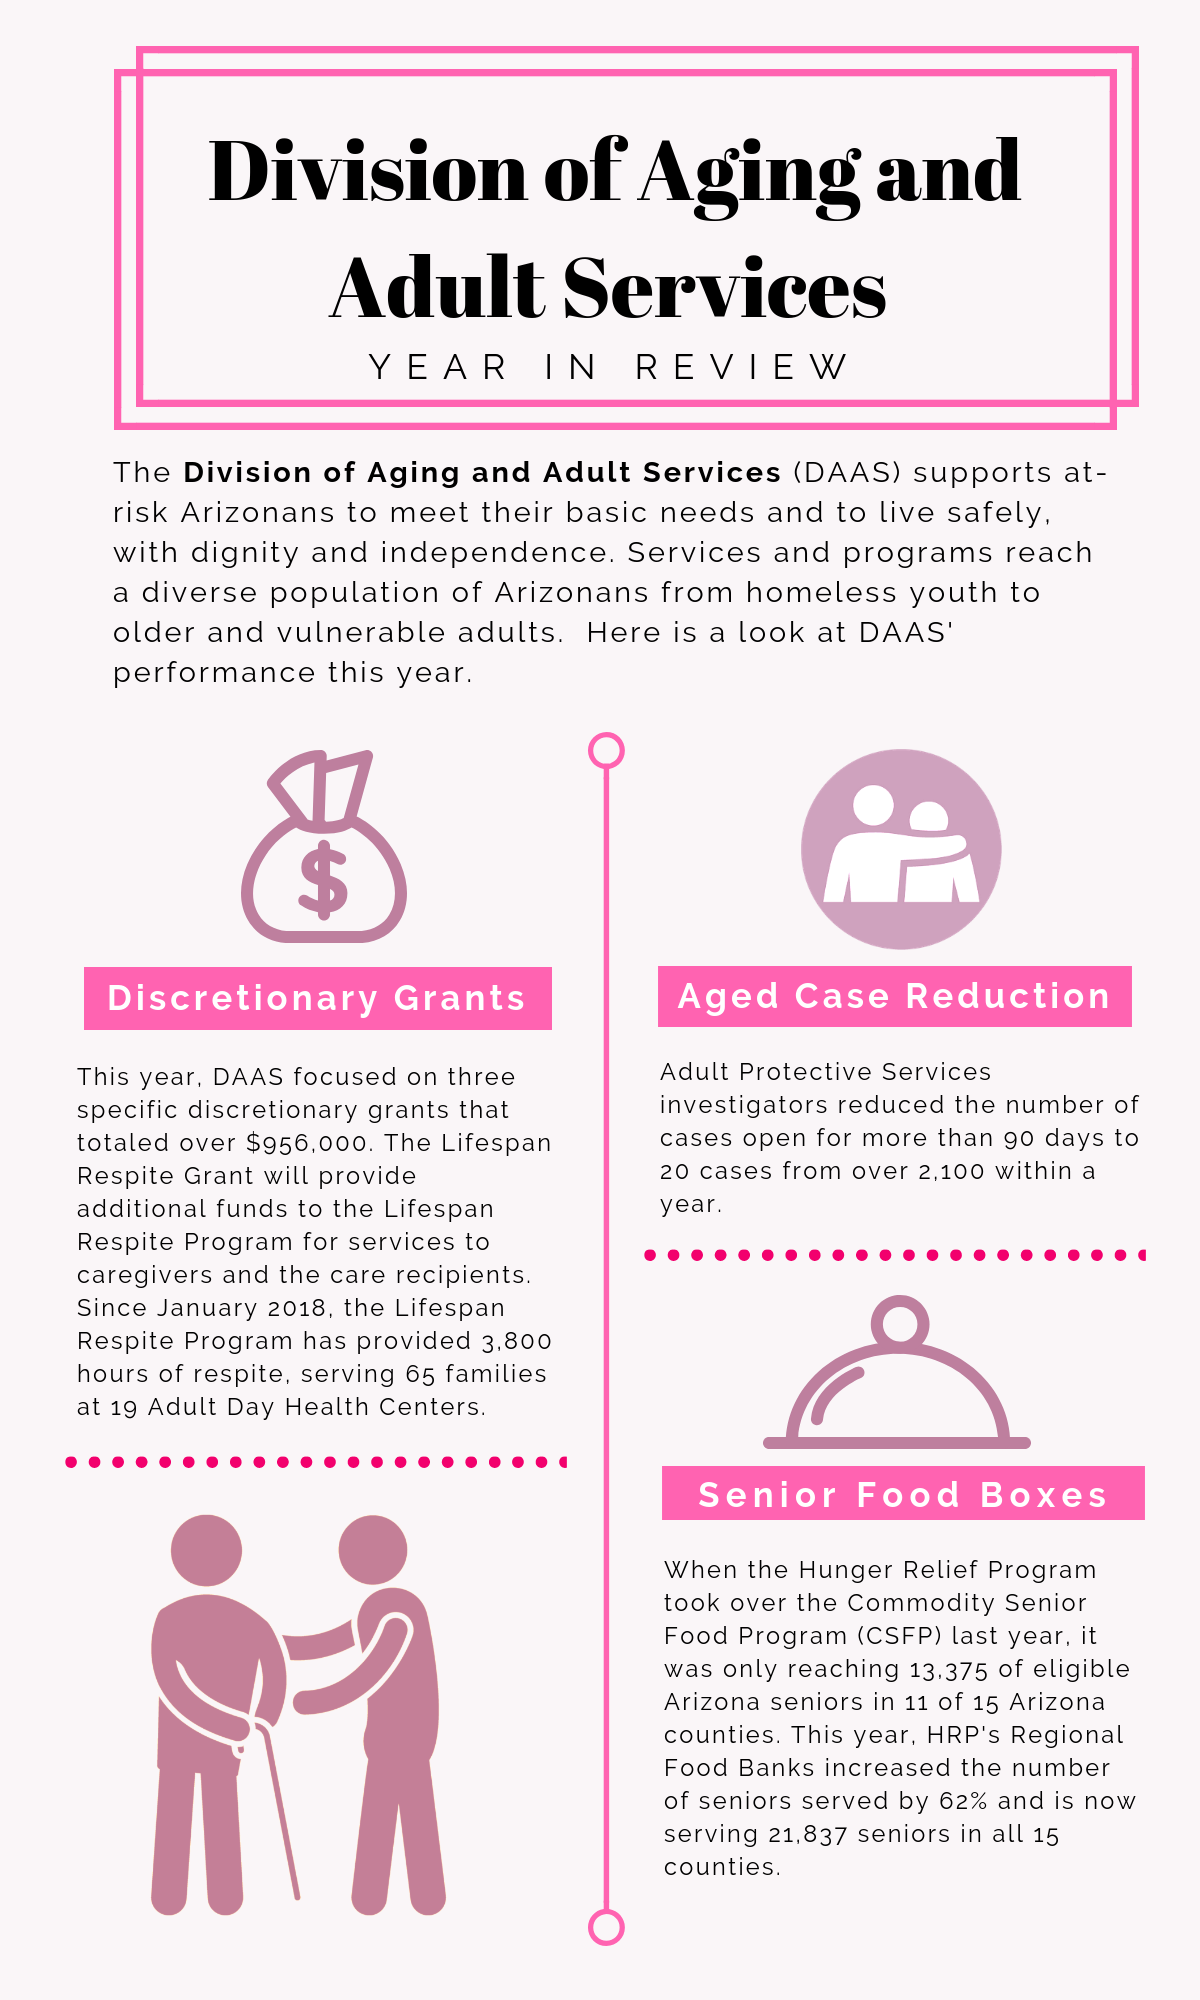 Division of Aging and Adult Services Year in Review 2018